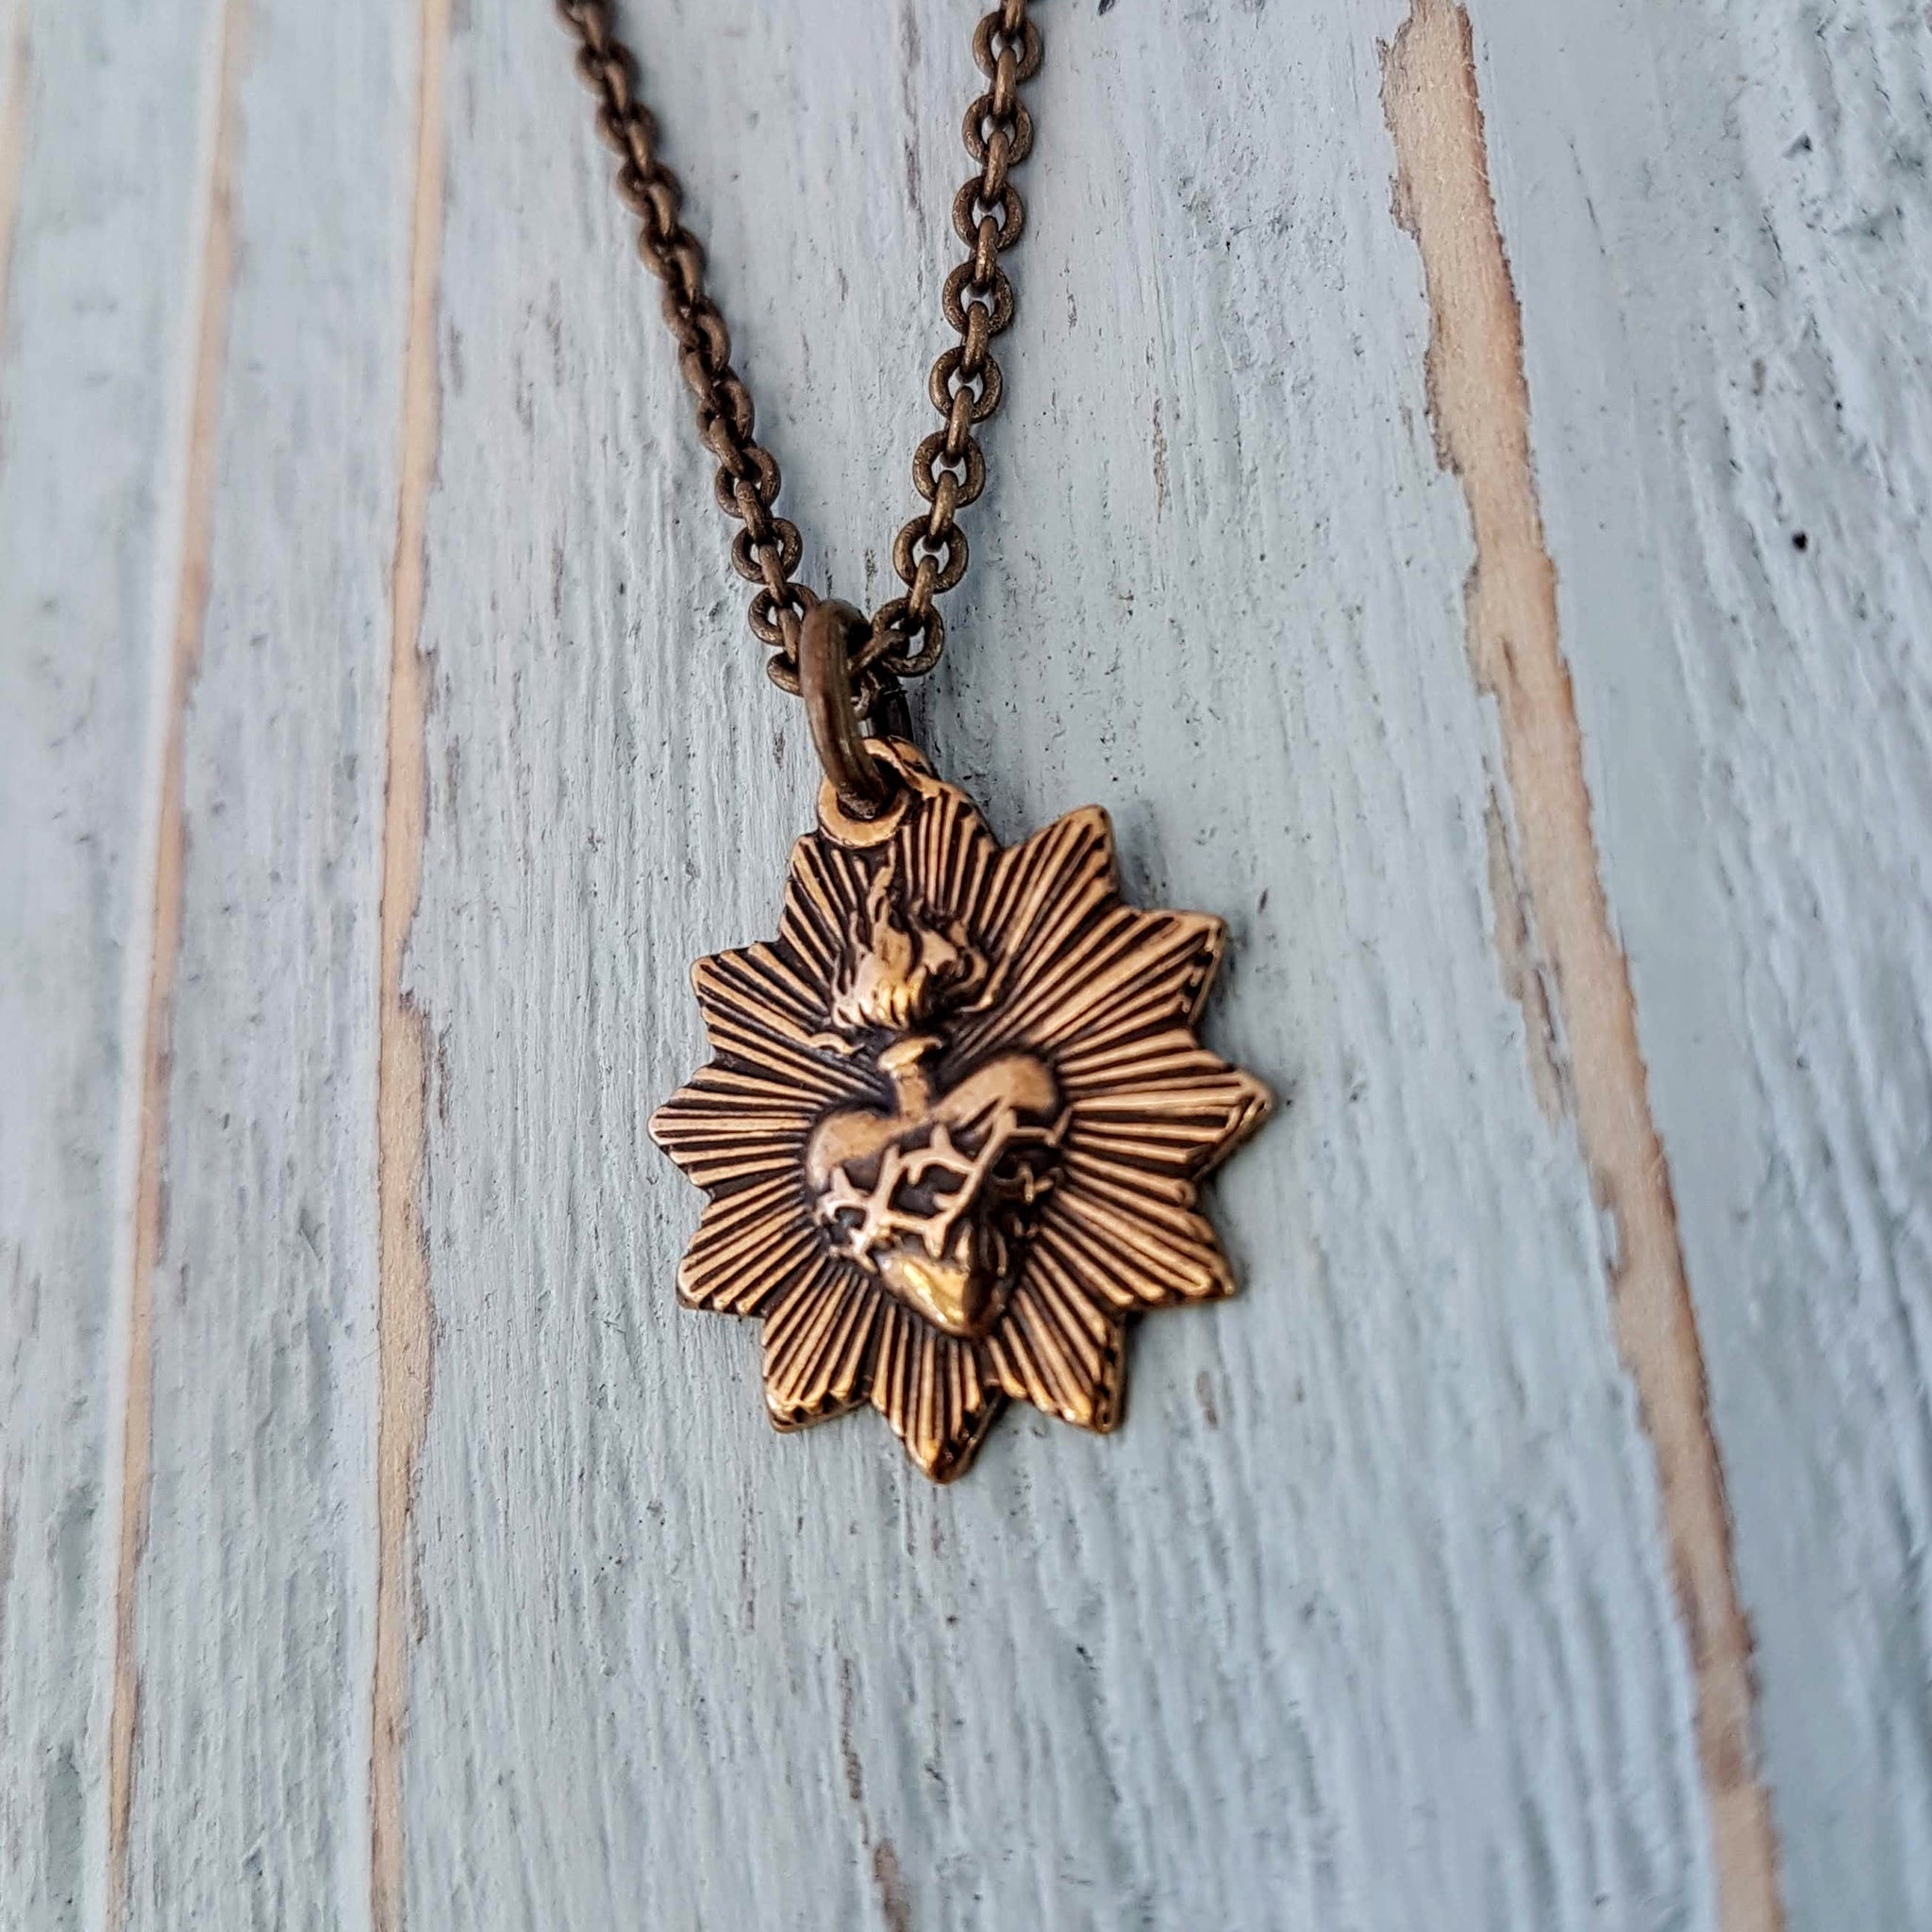 Sacred Heart Necklace - Gwen Delicious Jewelry Designs